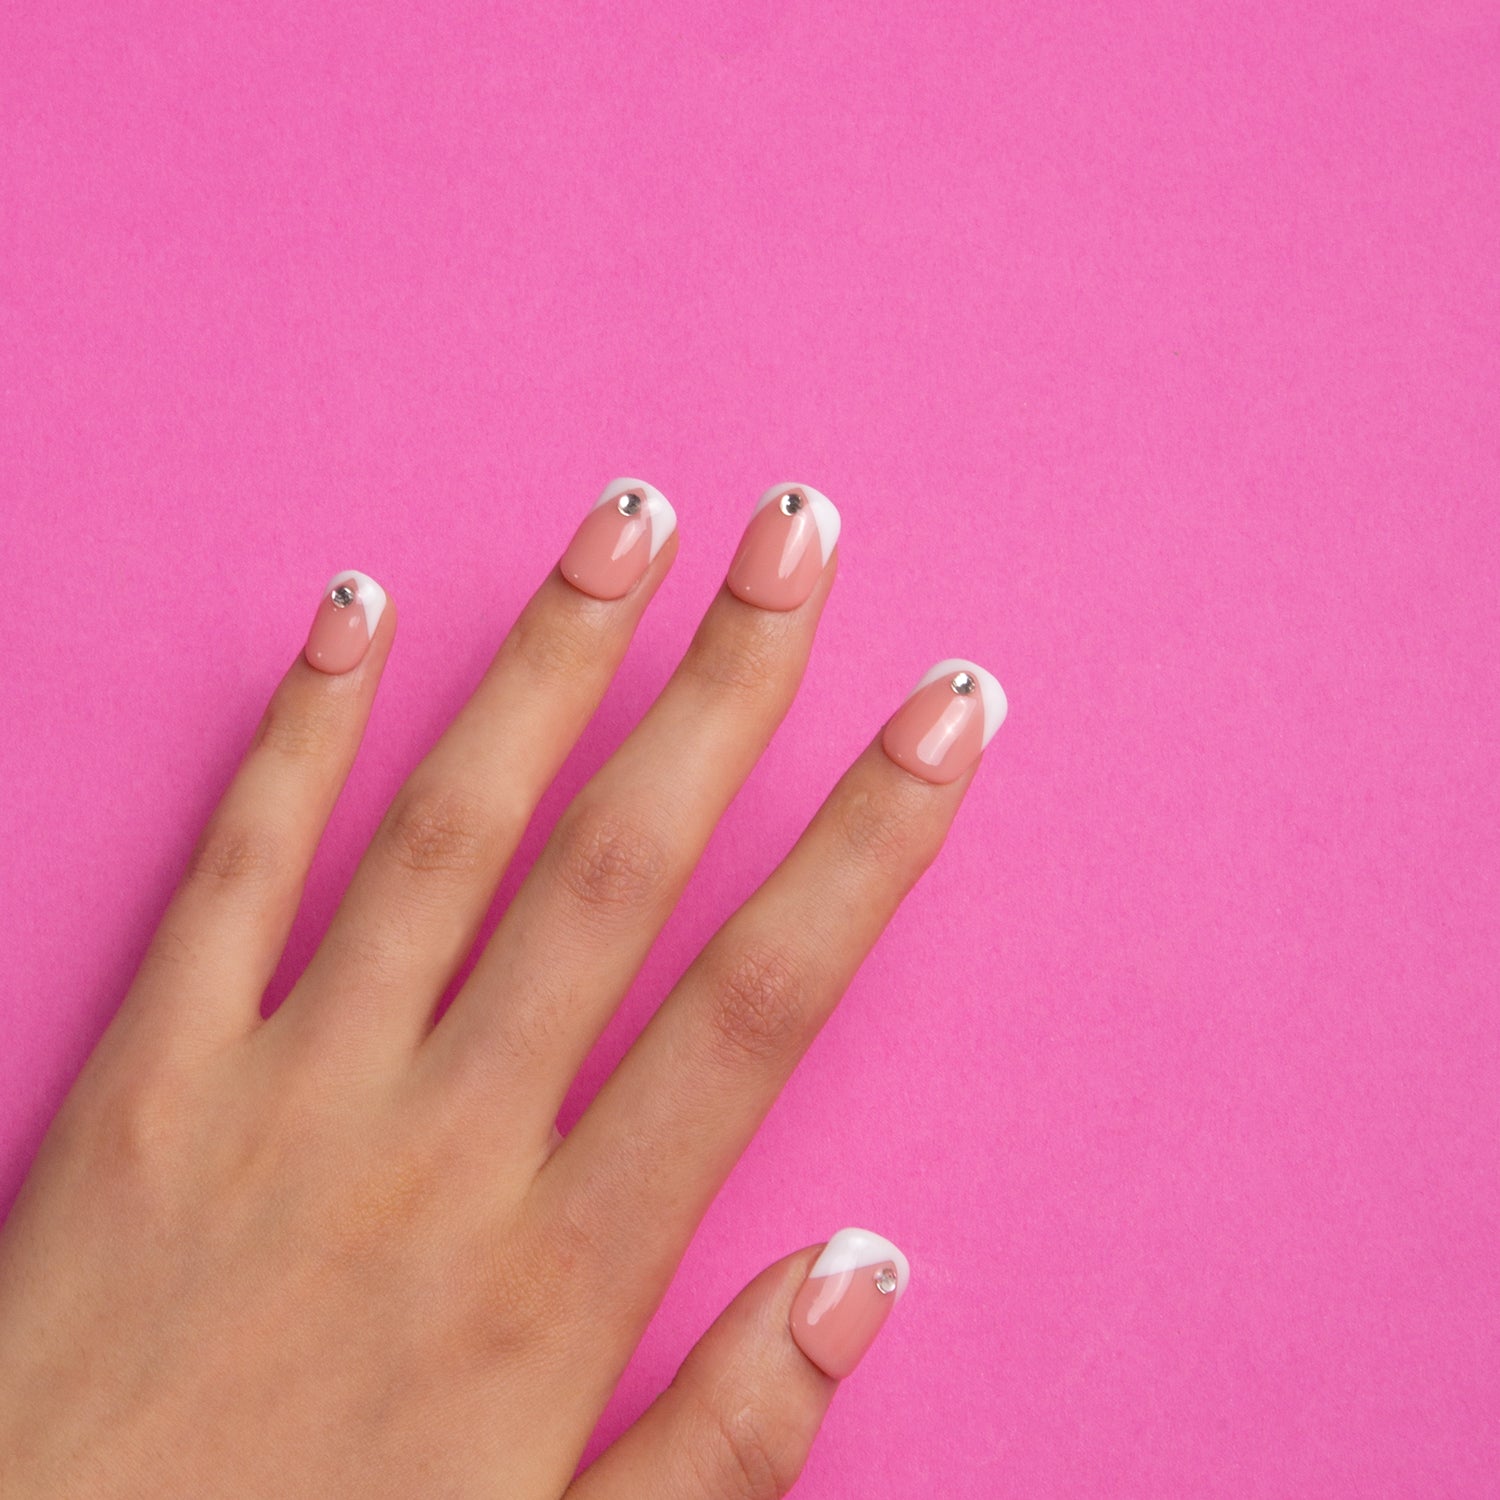 Hand with 'Eternal Polaris' press-on acrylic nails from Lovful on a pink background. The nails have white triangle French tips and are decorated with a single rhinestone on each nail.